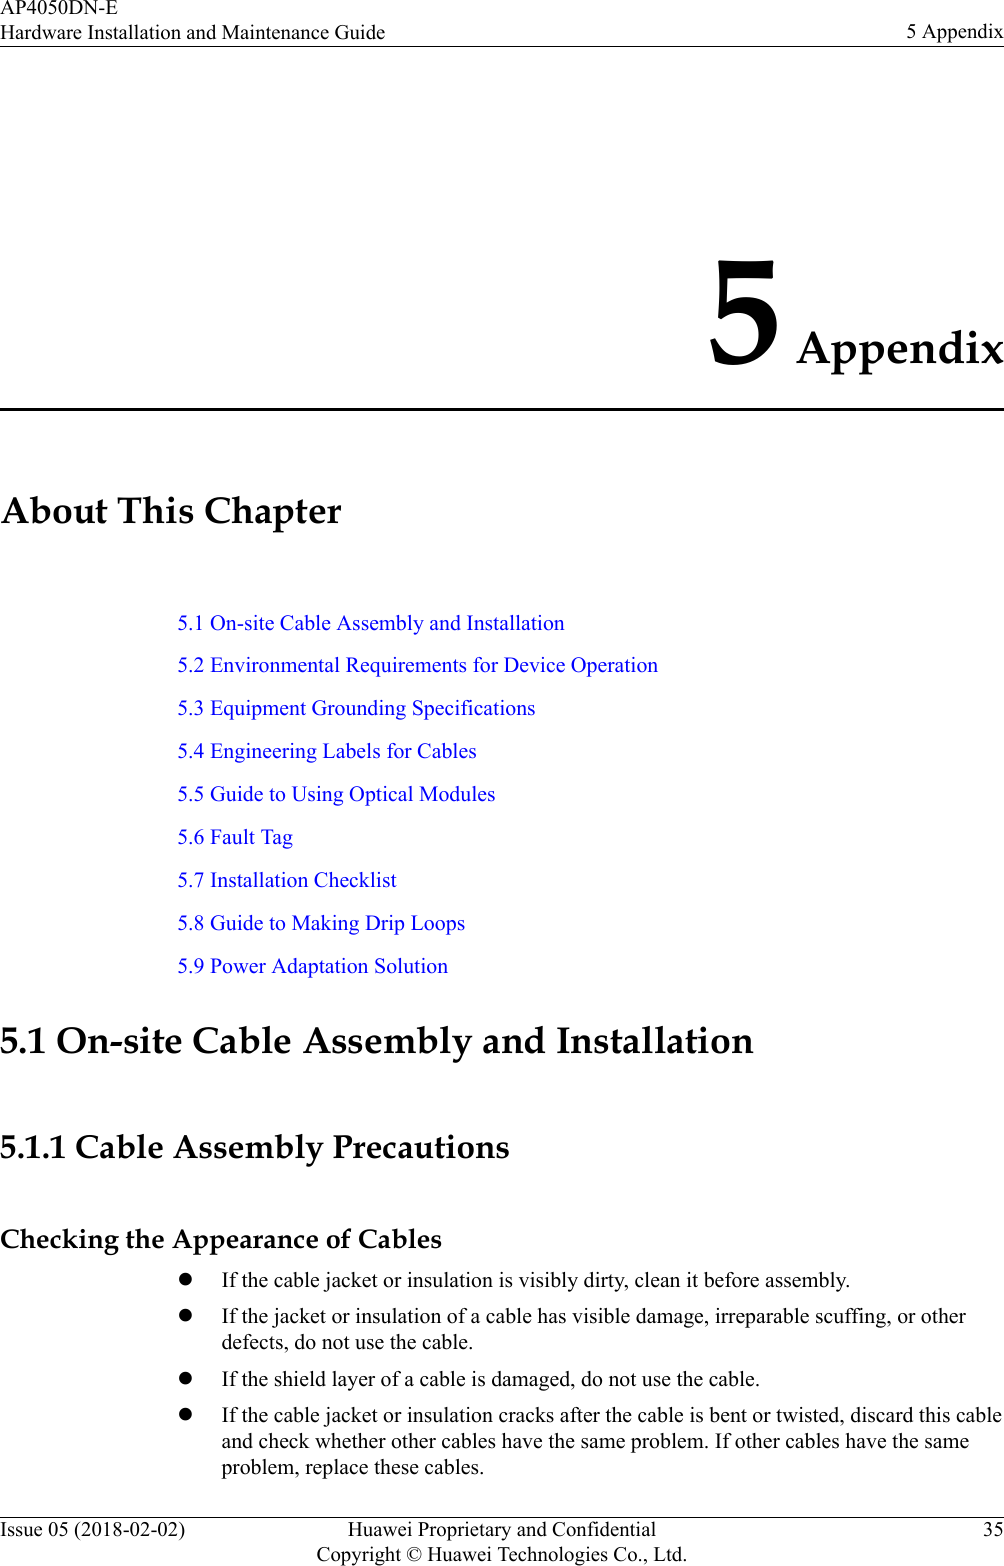 5 AppendixAbout This Chapter5.1 On-site Cable Assembly and Installation5.2 Environmental Requirements for Device Operation5.3 Equipment Grounding Specifications5.4 Engineering Labels for Cables5.5 Guide to Using Optical Modules5.6 Fault Tag5.7 Installation Checklist5.8 Guide to Making Drip Loops5.9 Power Adaptation Solution5.1 On-site Cable Assembly and Installation5.1.1 Cable Assembly PrecautionsChecking the Appearance of CableslIf the cable jacket or insulation is visibly dirty, clean it before assembly.lIf the jacket or insulation of a cable has visible damage, irreparable scuffing, or otherdefects, do not use the cable.lIf the shield layer of a cable is damaged, do not use the cable.lIf the cable jacket or insulation cracks after the cable is bent or twisted, discard this cableand check whether other cables have the same problem. If other cables have the sameproblem, replace these cables.AP4050DN-EHardware Installation and Maintenance Guide 5 AppendixIssue 05 (2018-02-02) Huawei Proprietary and ConfidentialCopyright © Huawei Technologies Co., Ltd.35